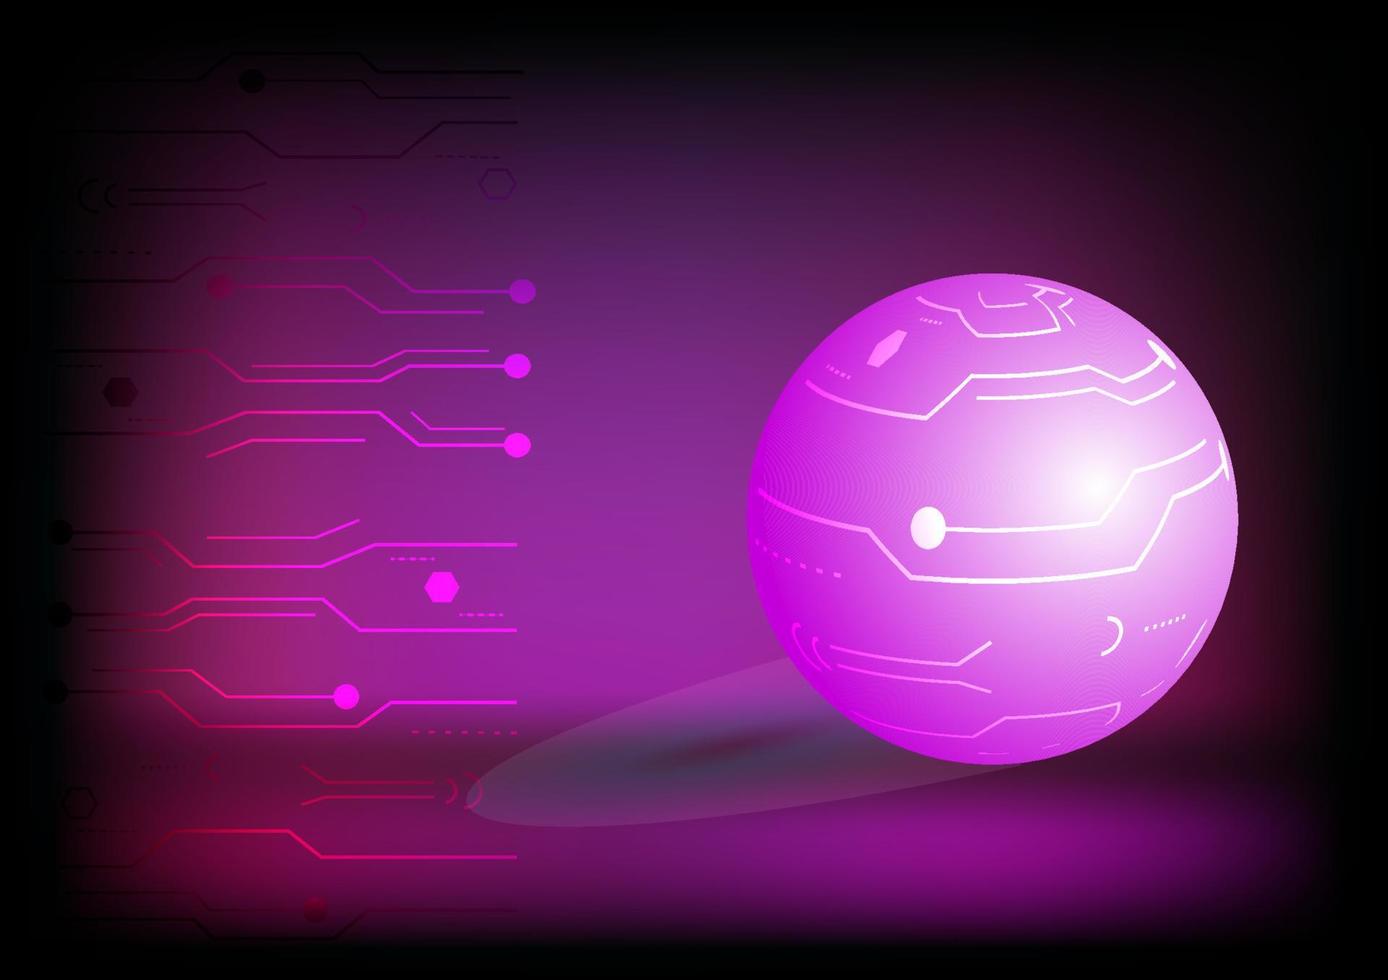 Ball circuit technology abstract backgrounds wallpaper vector illustration EPS10 06052021  SS